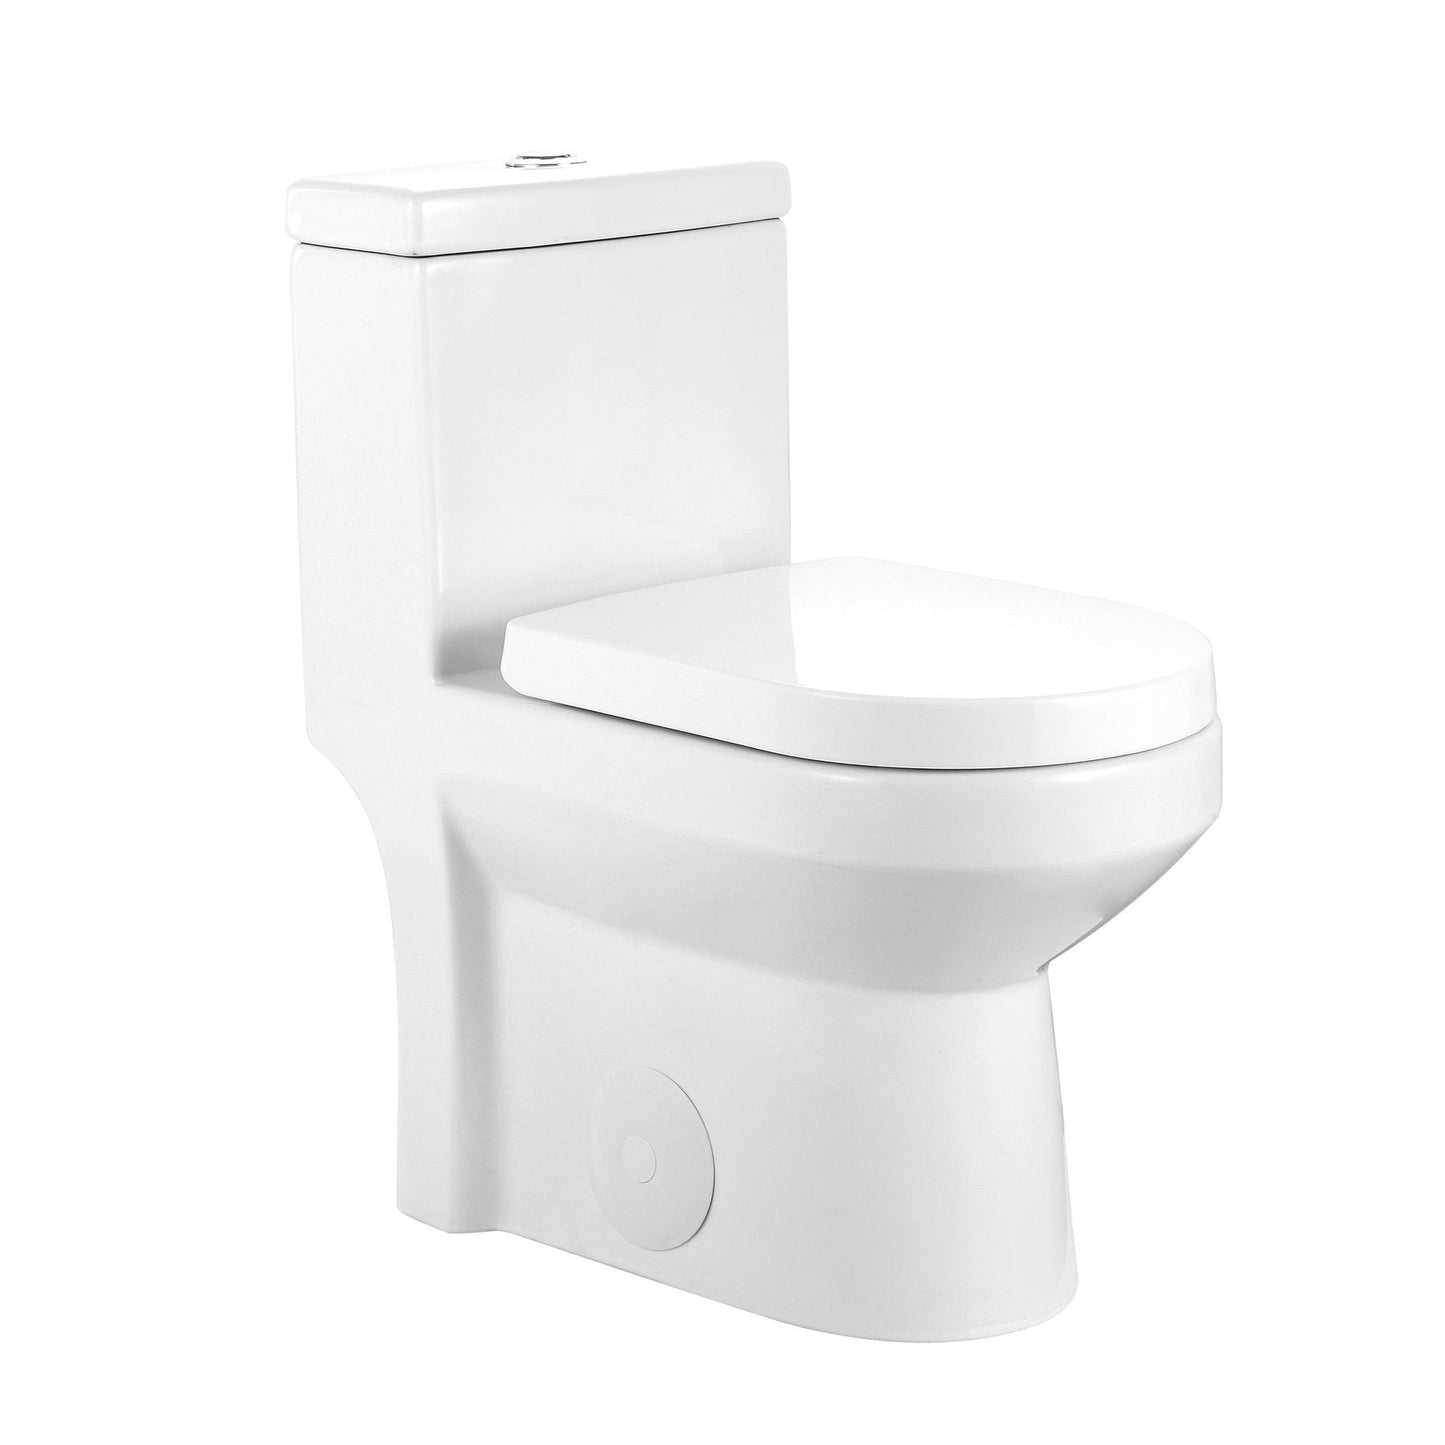 DeerValley Liberty 10" Rough-in Dual-Flush Elongated White One-Piece Toilet With Soft Closing Seat